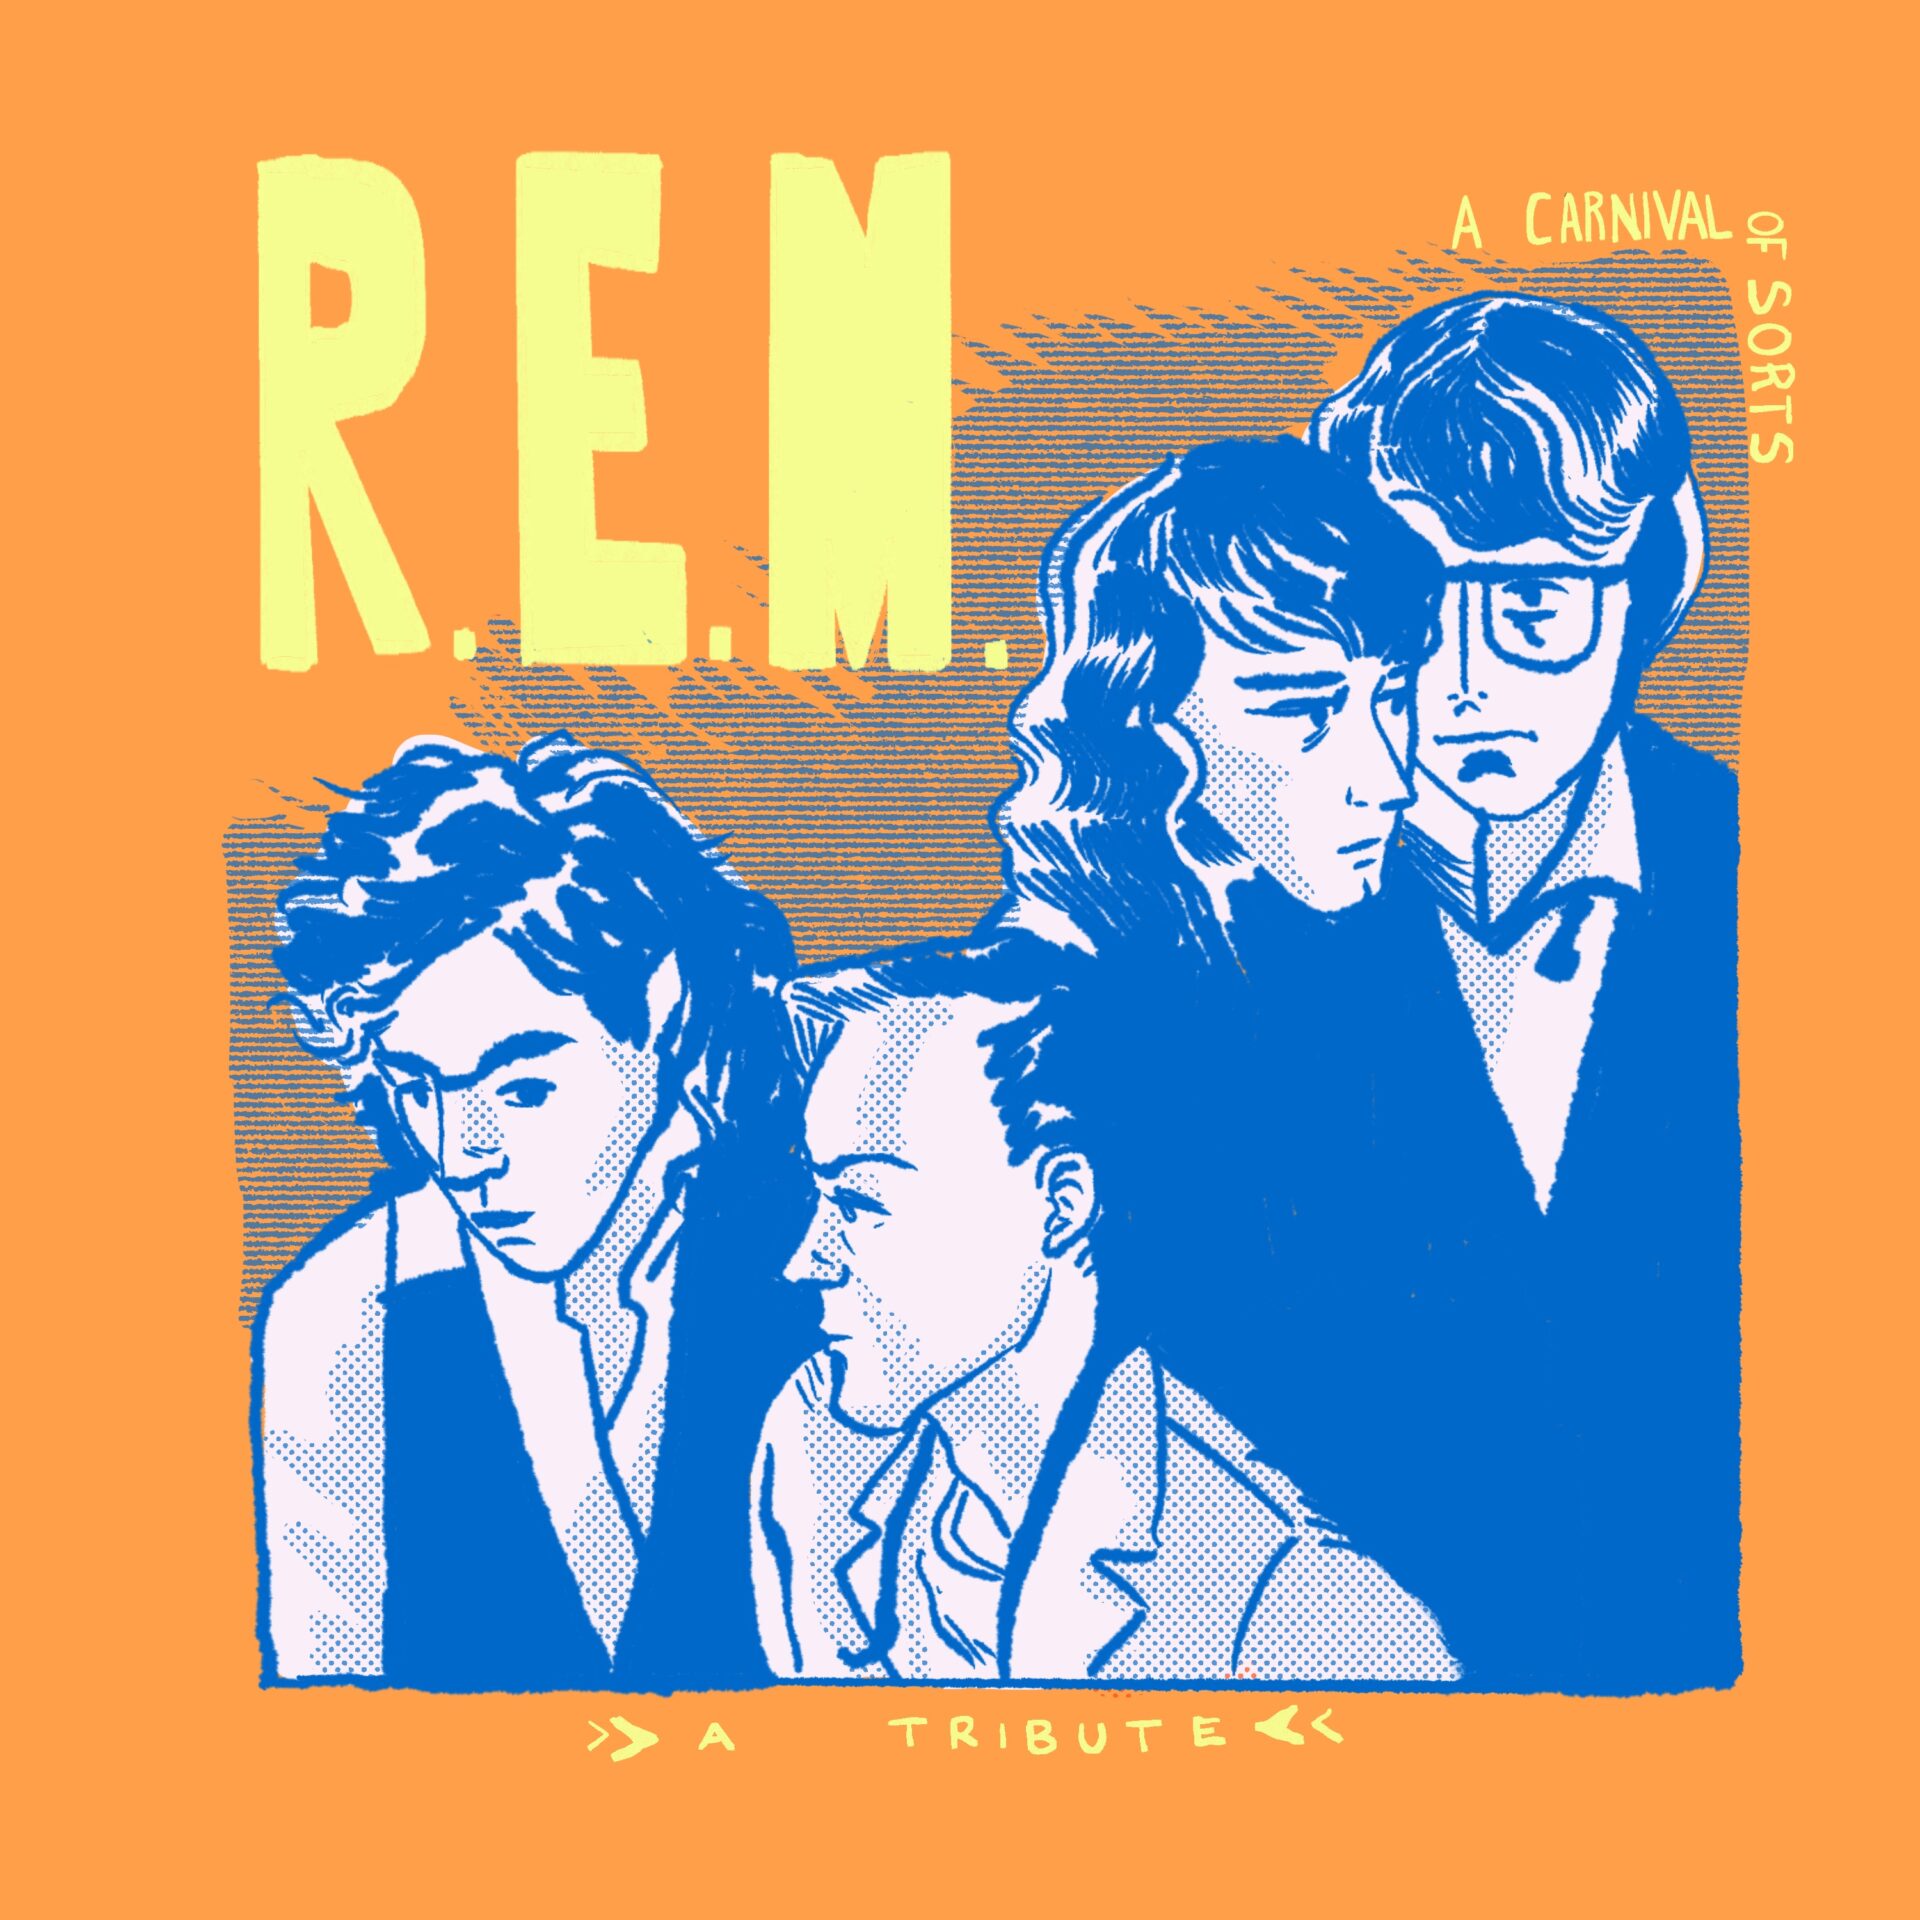 NEWS: A Carnival of Sorts: an R.E.M. covers compilation in Aid of Help Musicians